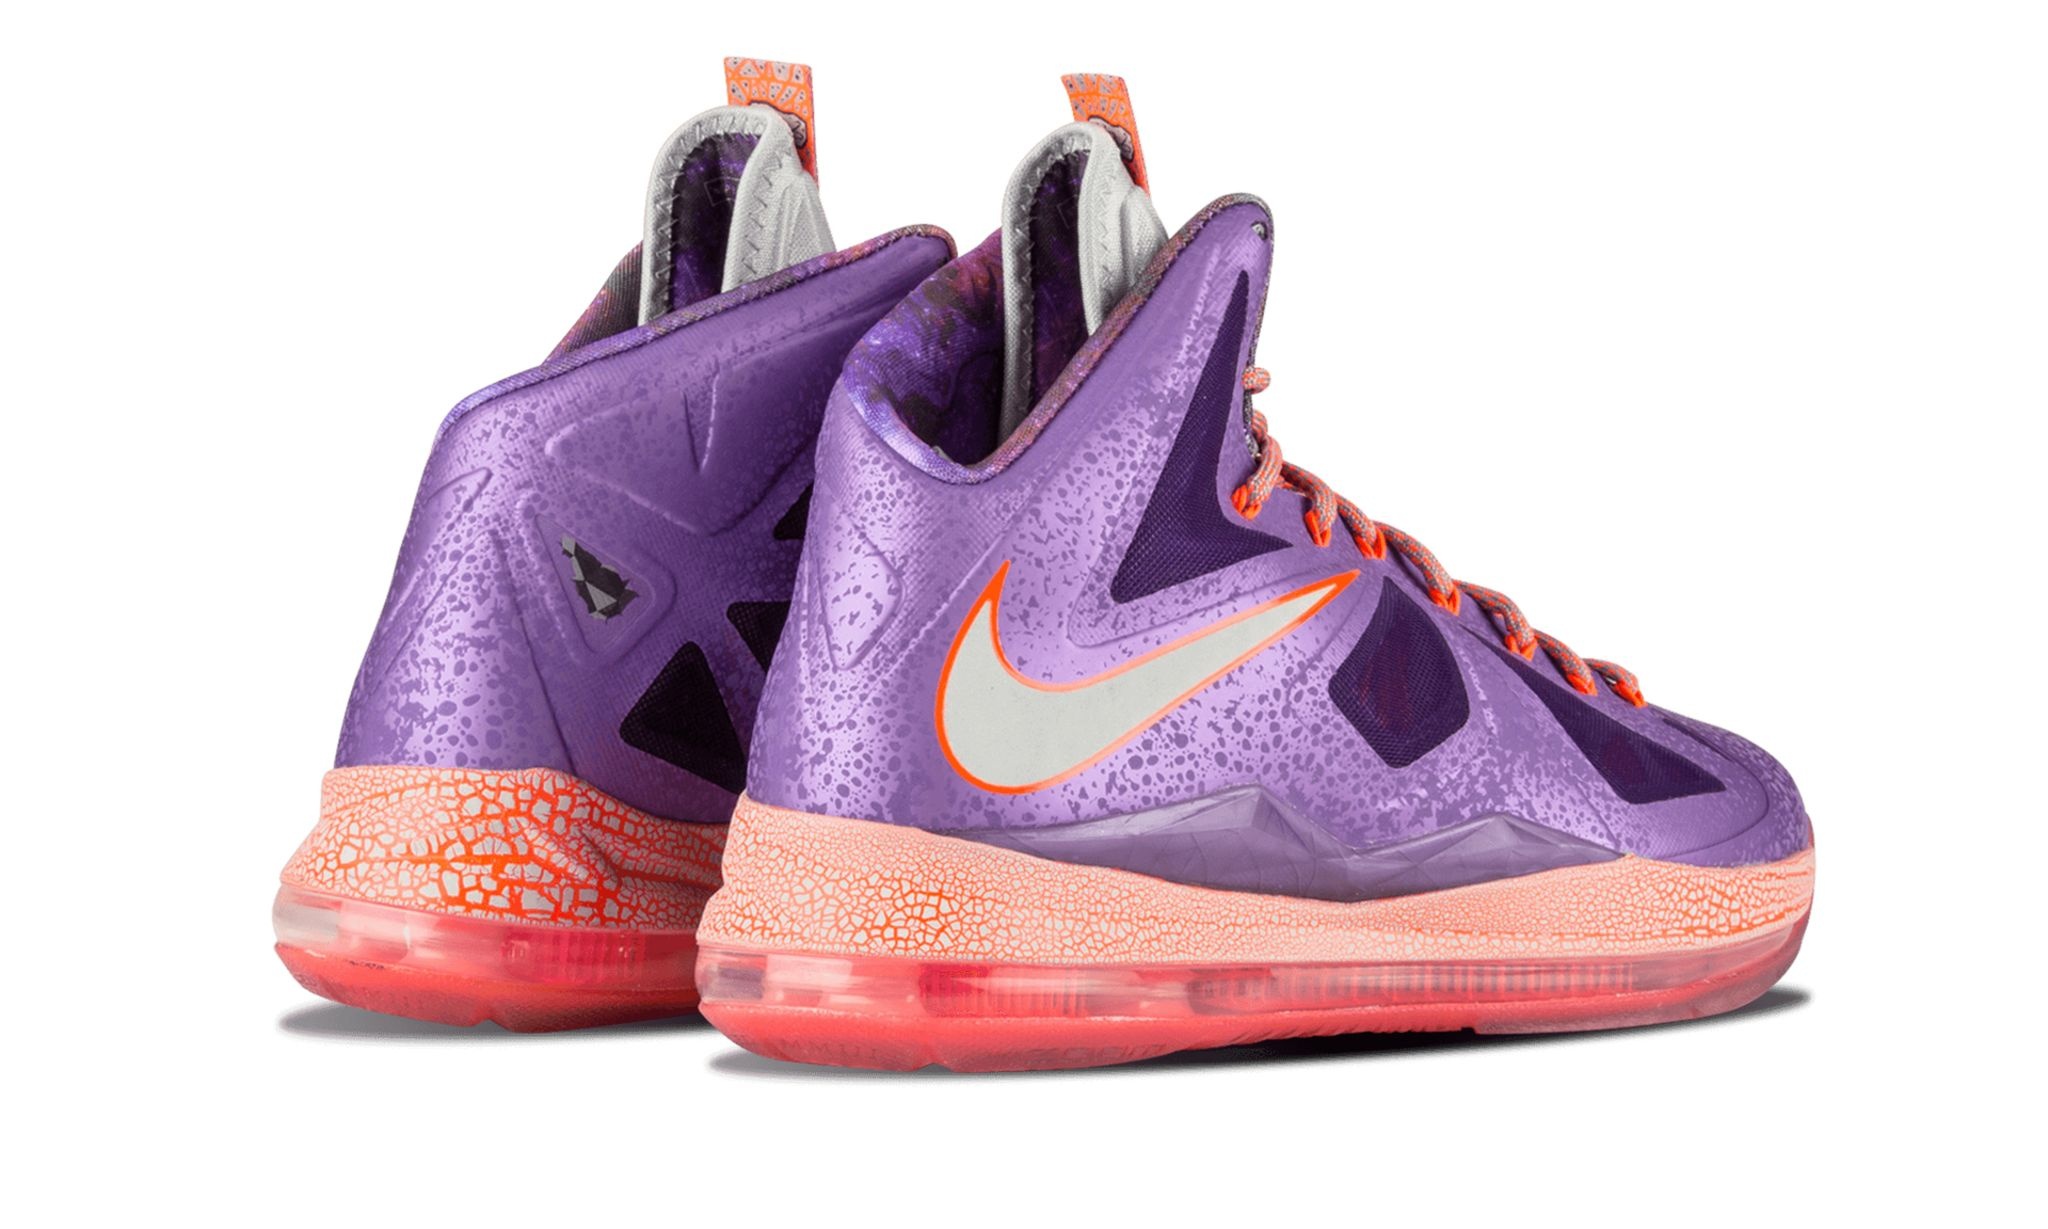 Lebron 10 - AS "Extraterrestrial" - 3